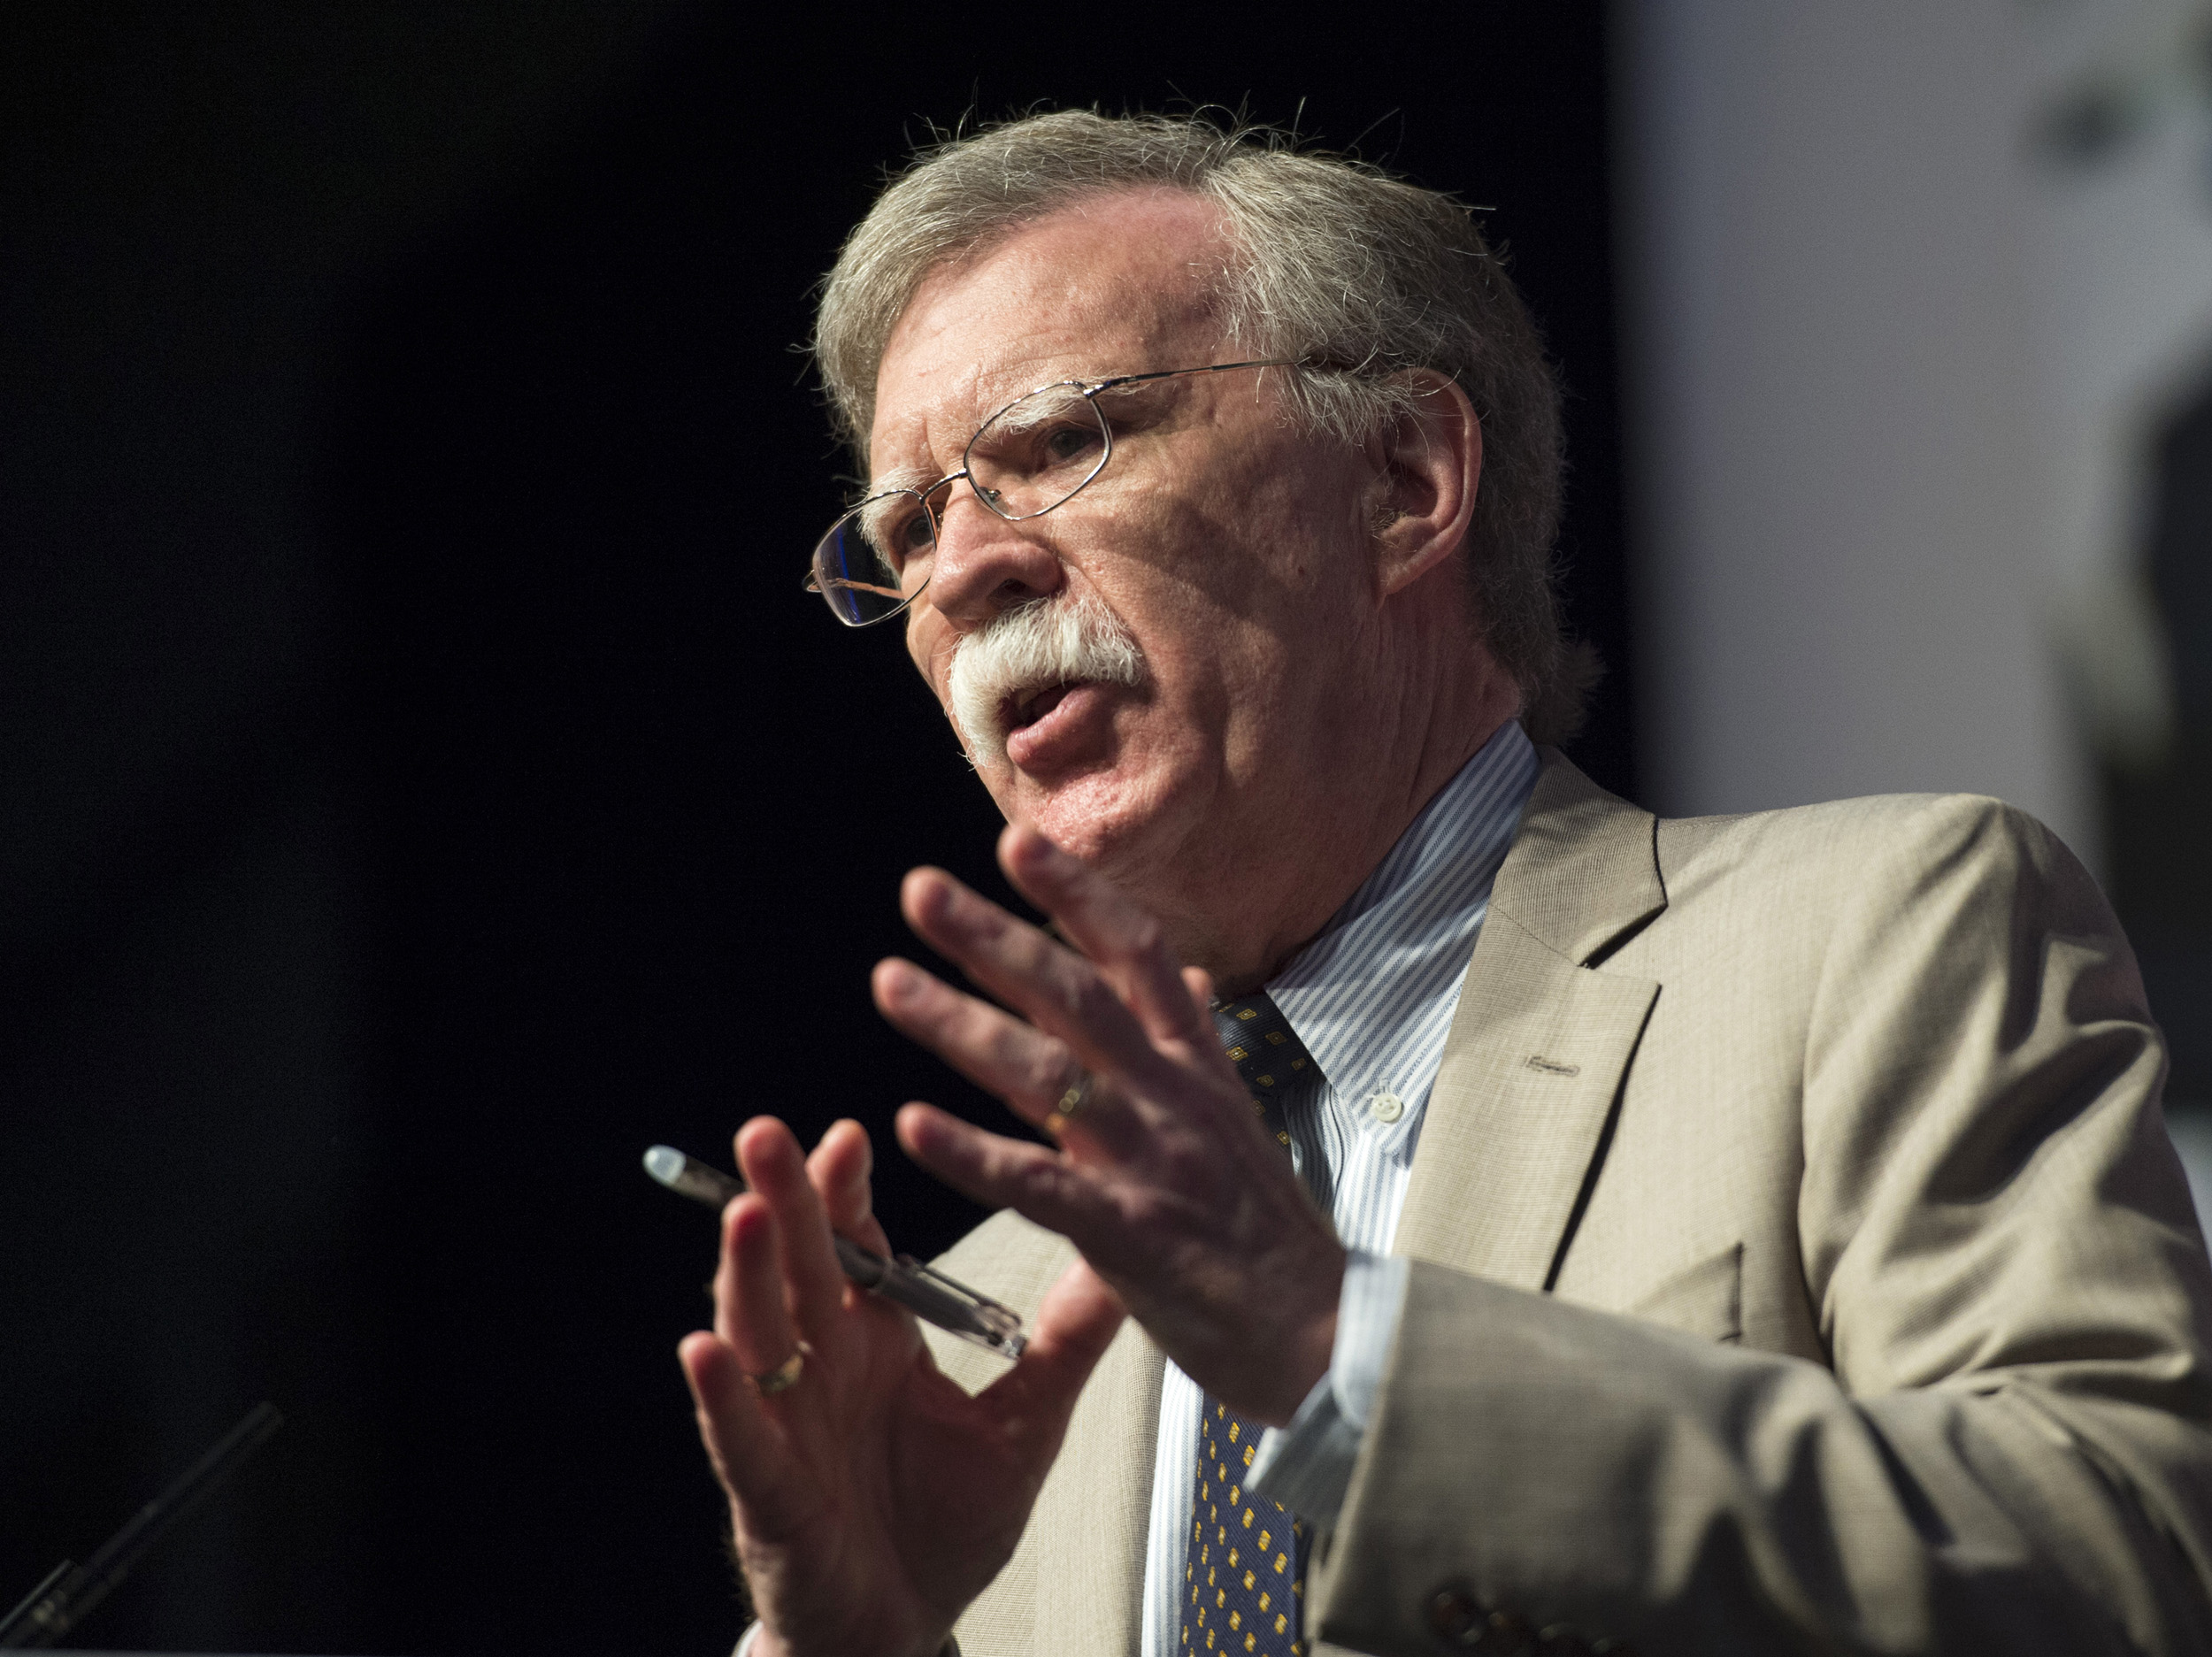 Ambassador John Bolton speaks during Faith and Freedom Coalition's Road to Majority event in Washington on June 19, 2014. (Molly Riley—AP)